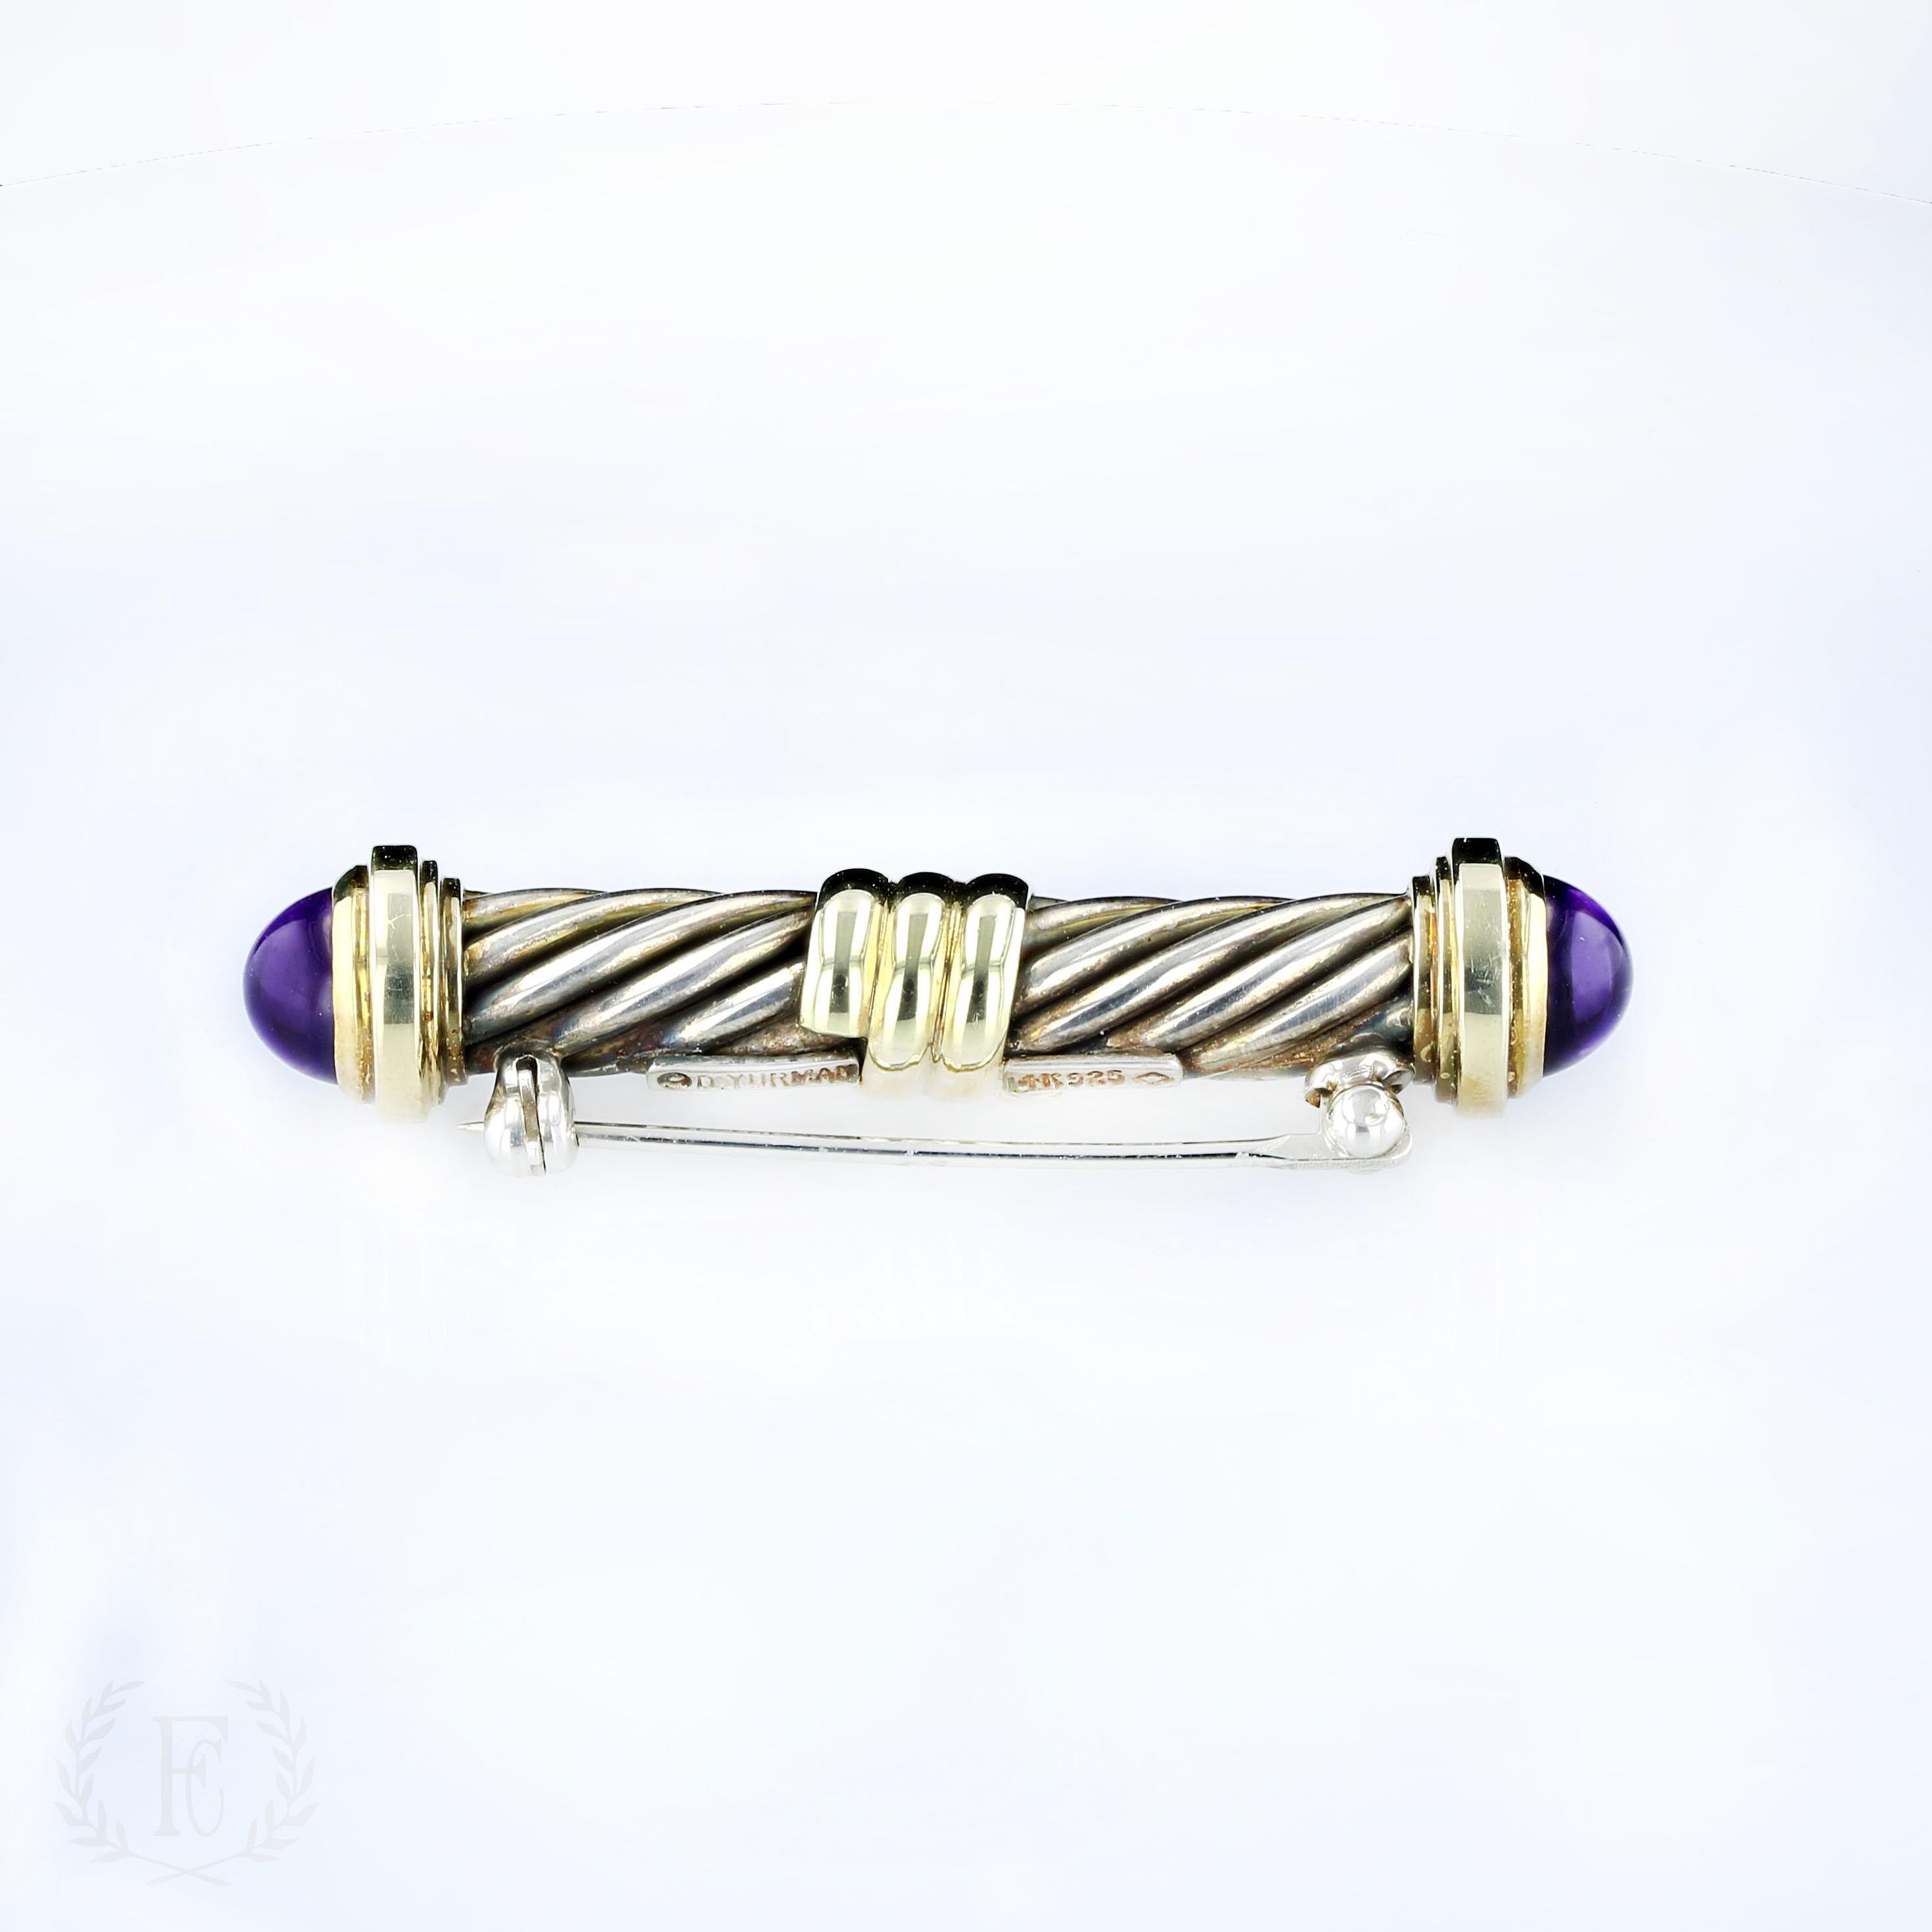 This estate sterling silver David Yurman pin features 14k yellow gold accents and a pair of amethyst cabochons that elegantly adorn the classic cable twist design. 

A great gentleman's gift; can be worn as a tie pin. 